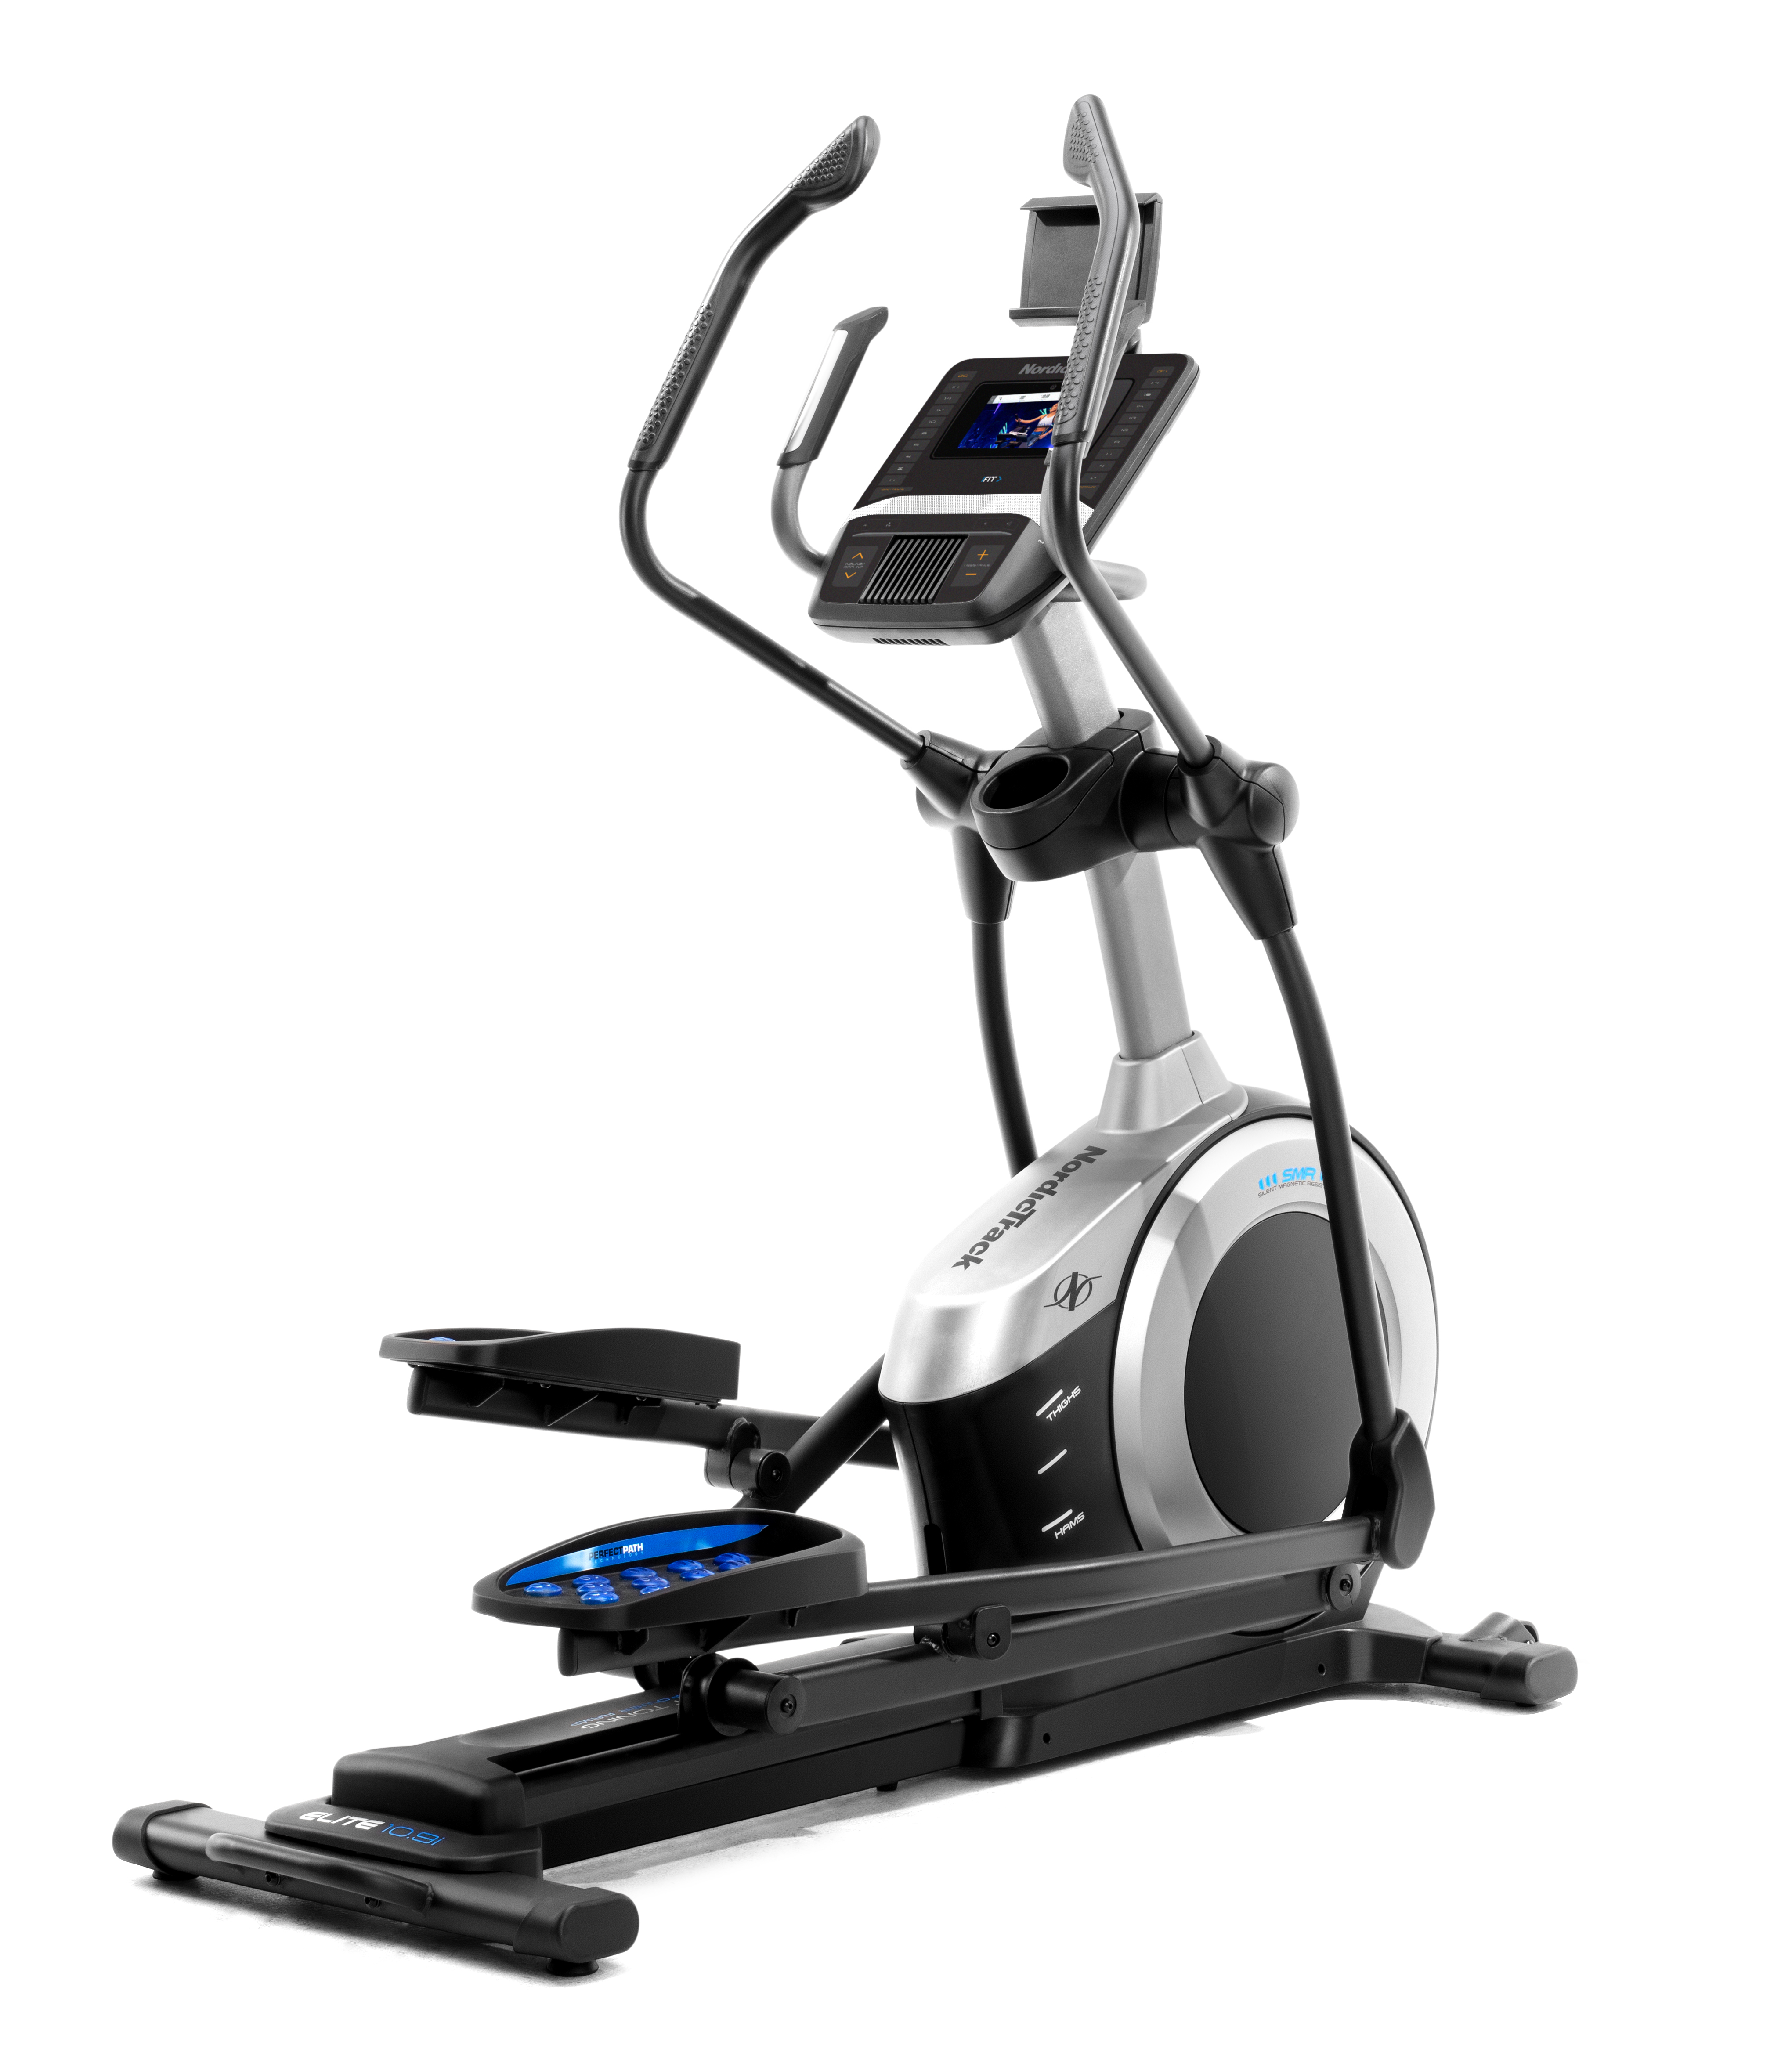 NordicTrack Elite 10.9i Elliptical with iFit Coach 1 Year Membership